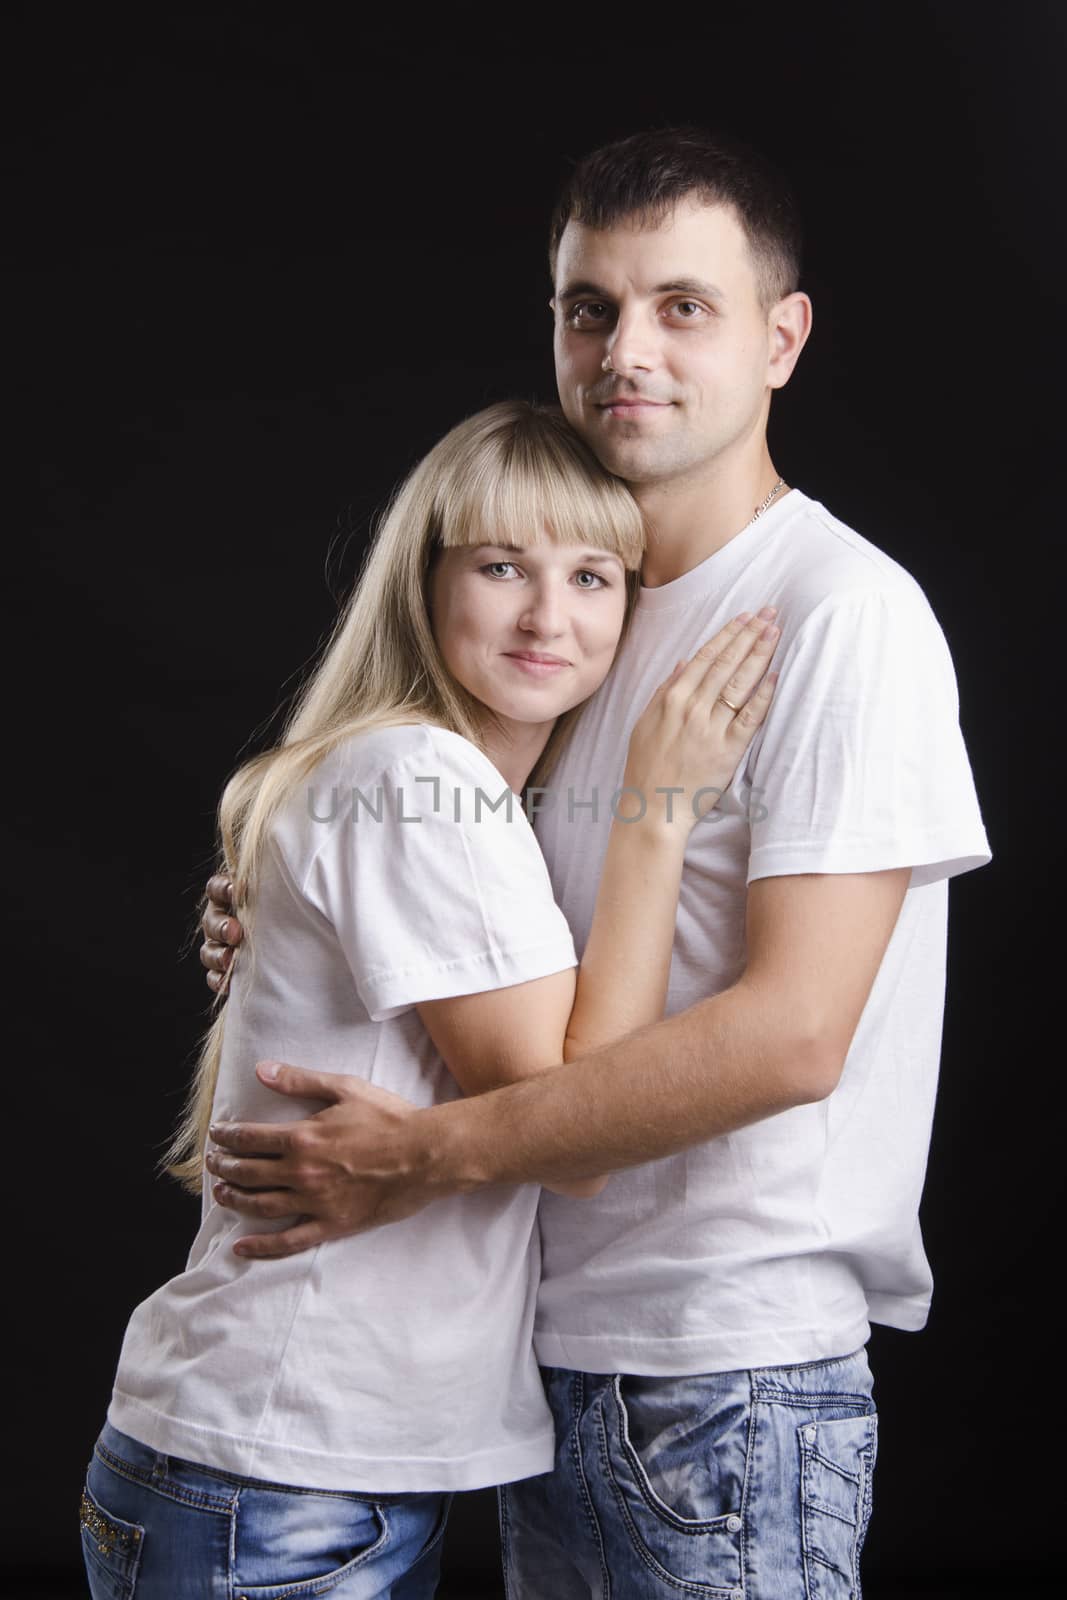 Portrait of a young couple on black background by Madhourse